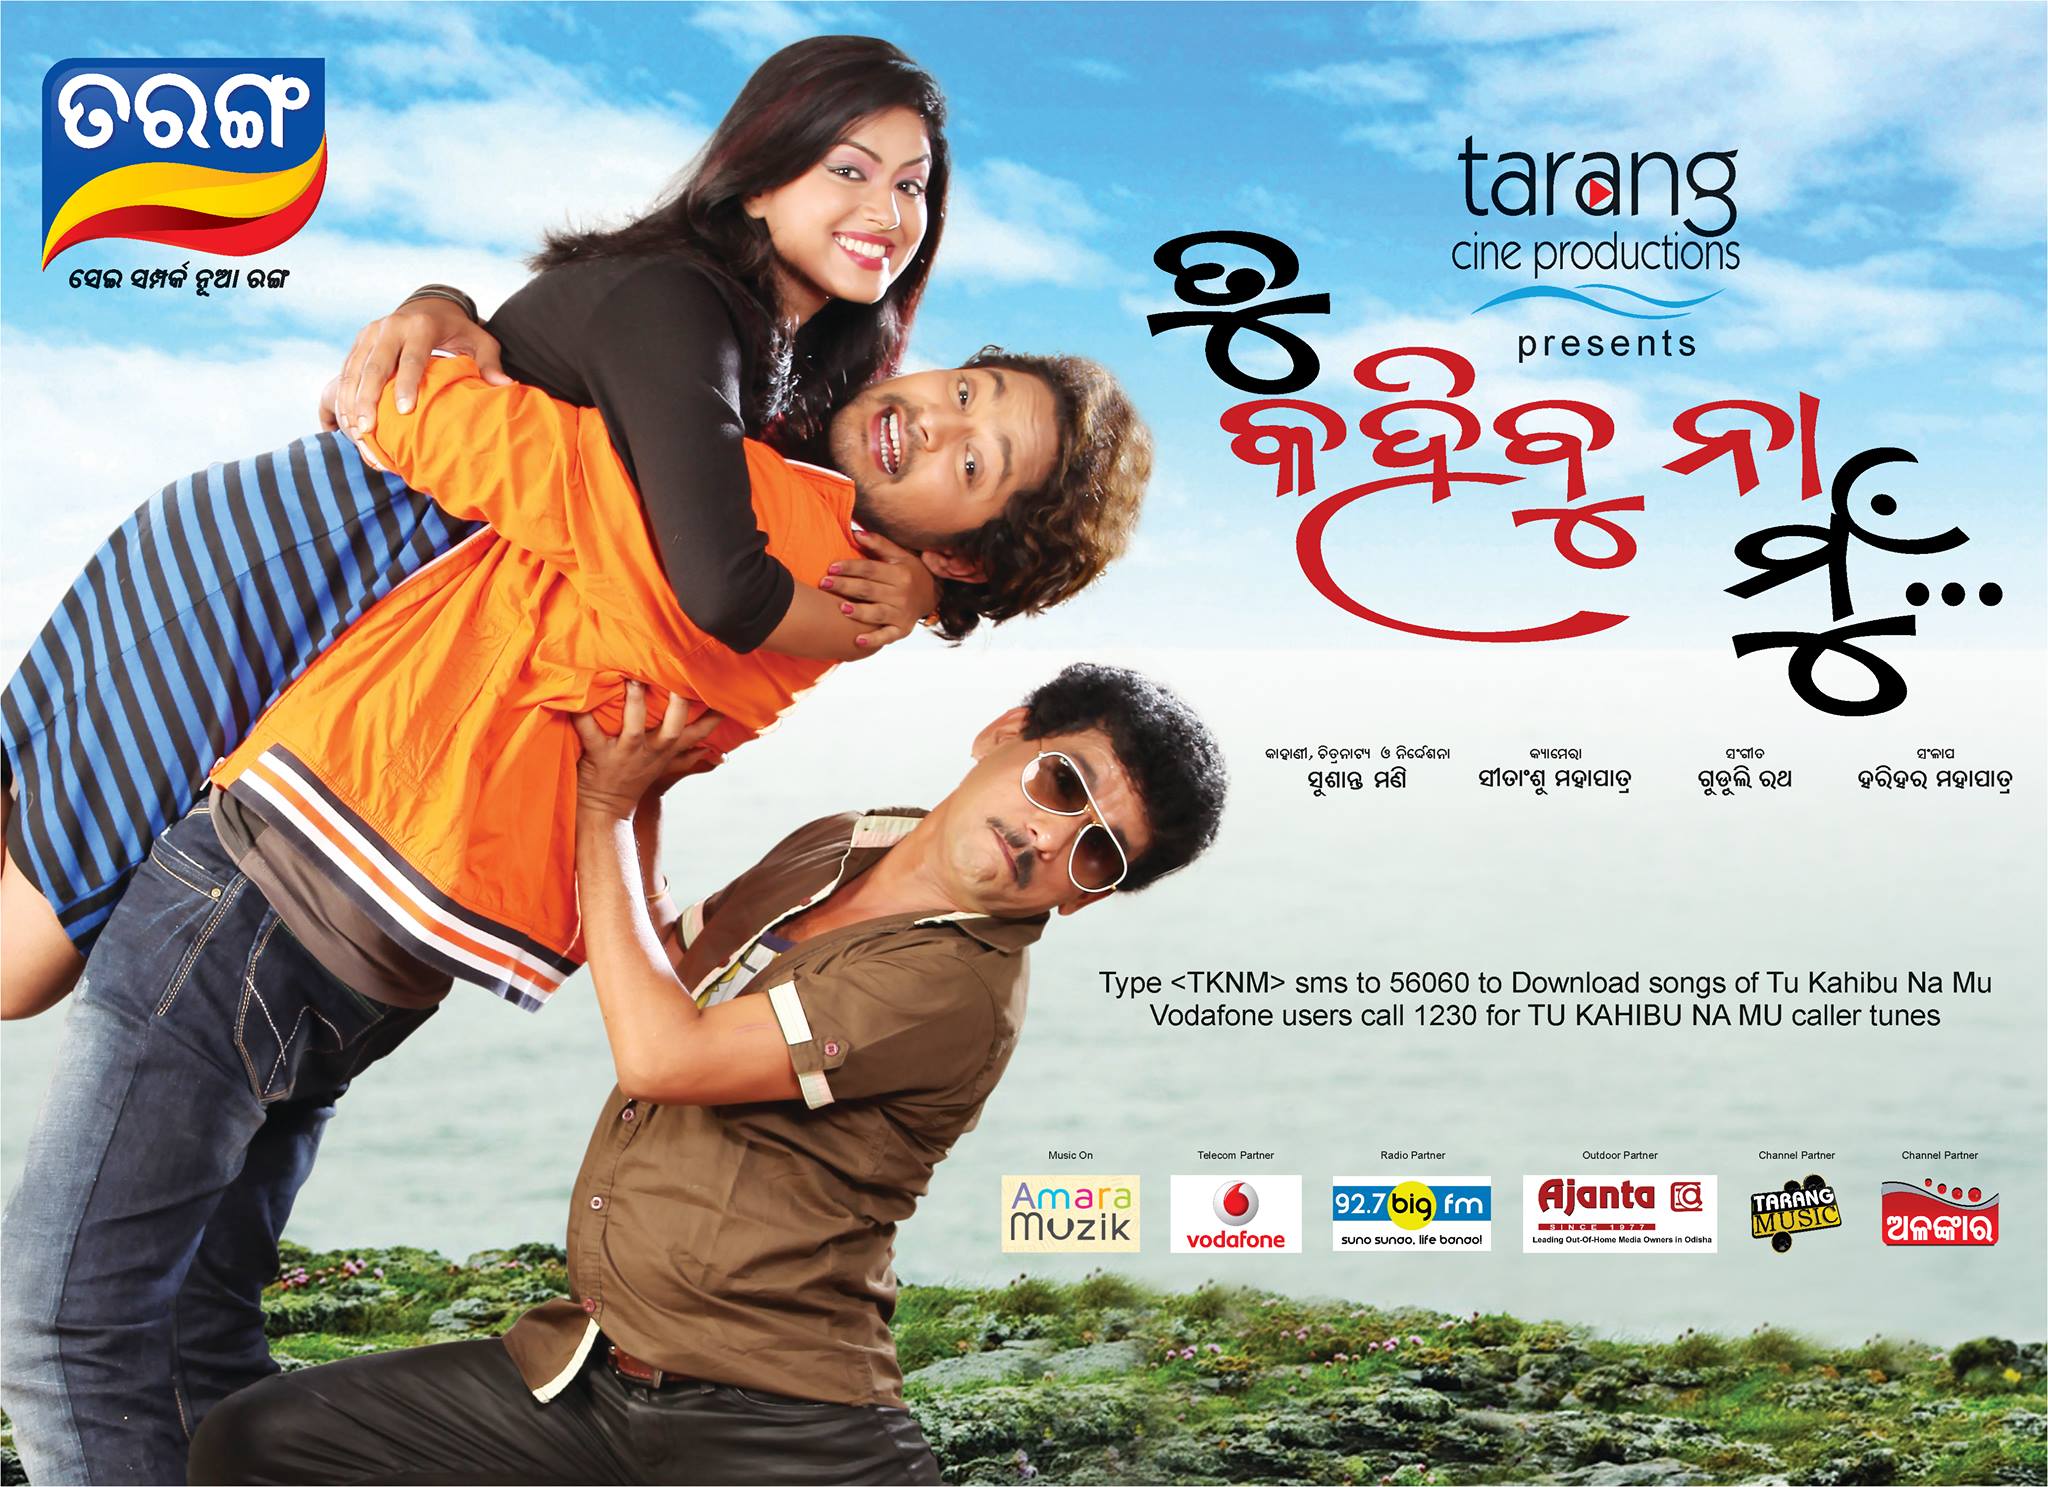 Top 10 Odia film Posters 7